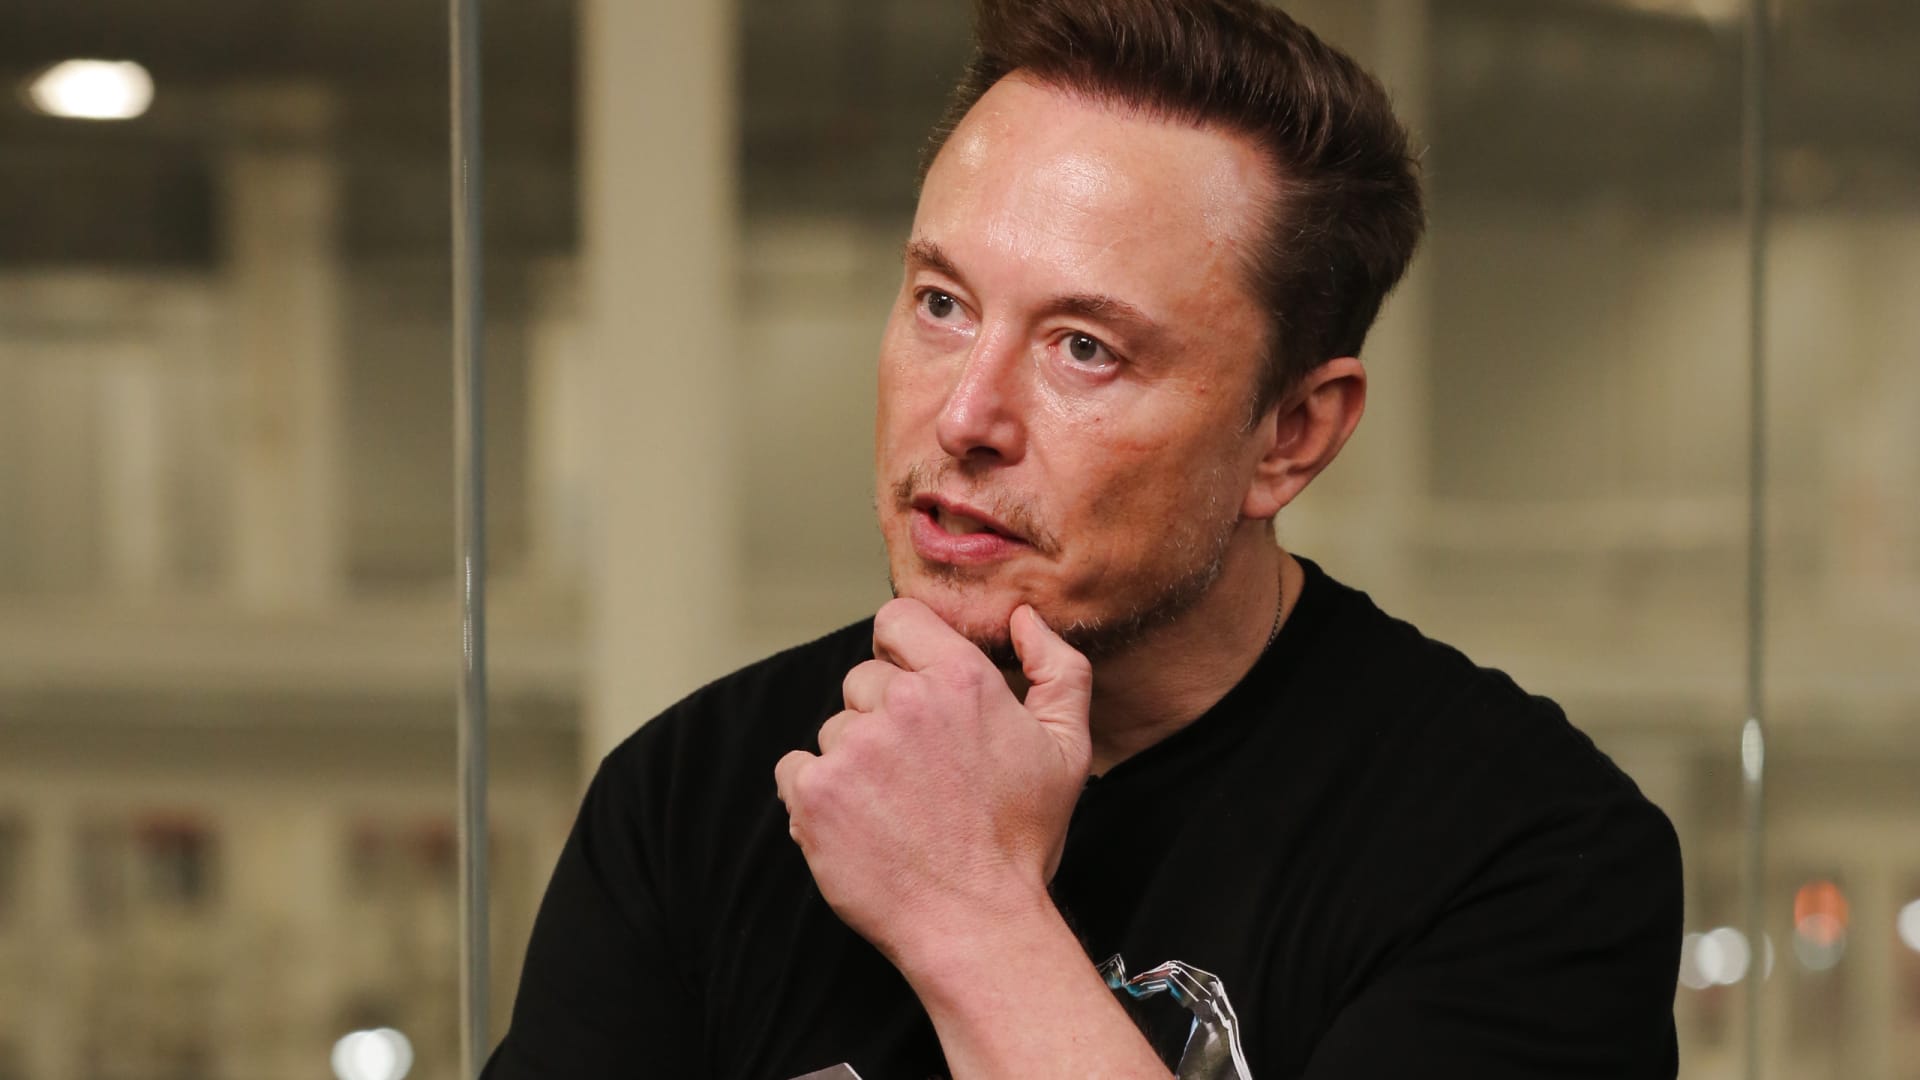 Elon Musk talks Tesla, Twitter, and why he tweets freely — even if it costs him money